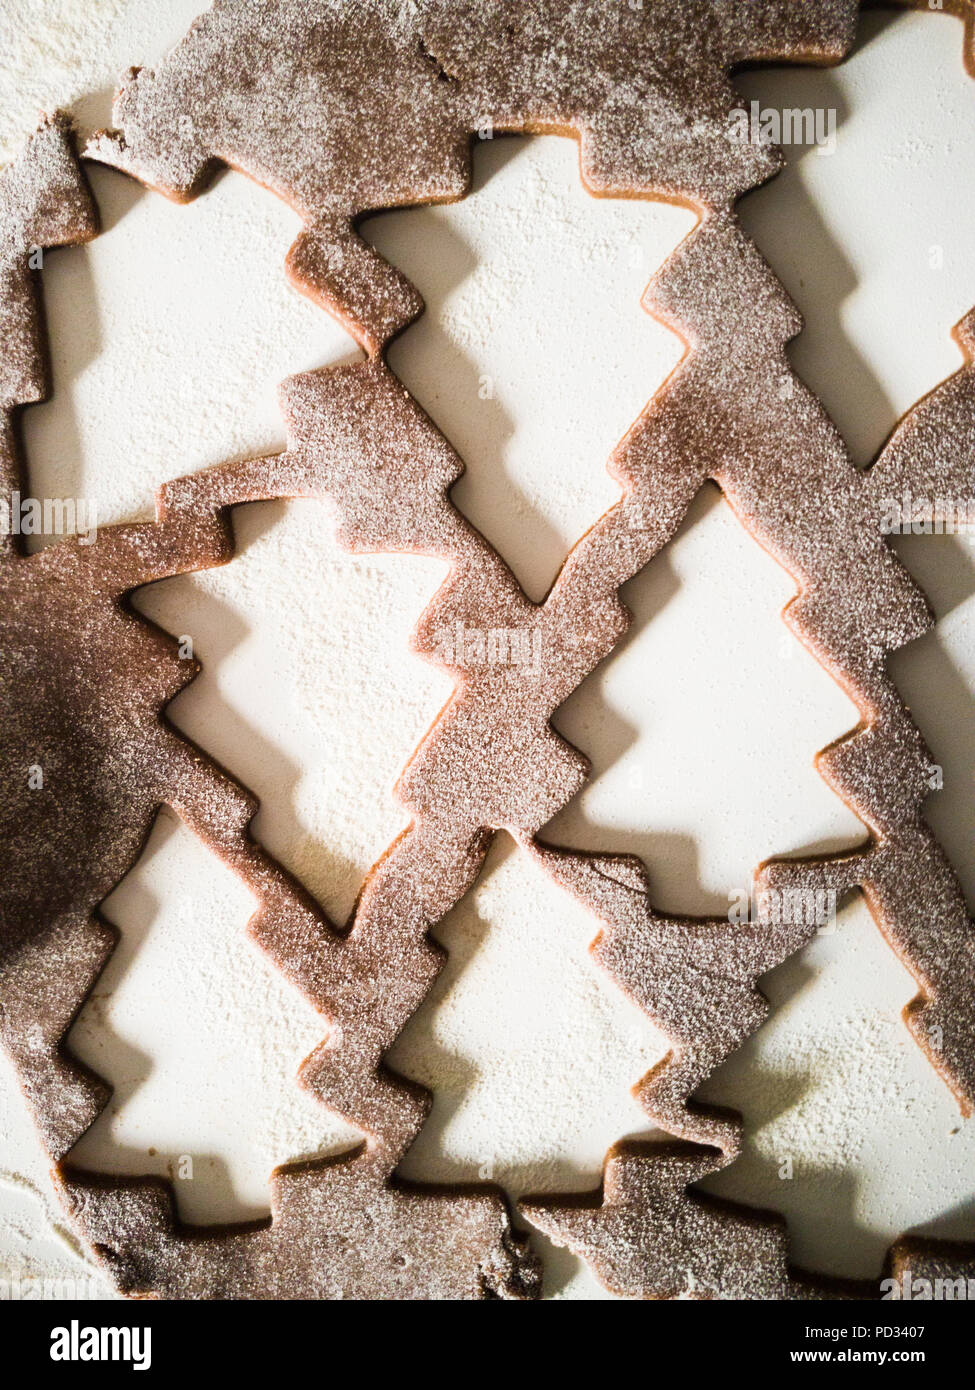 Close-up of raw pastry cutters with holes in a shape of Christmas trees, on a white background with flour around.  Raw gingerbread dough. Stock Photo